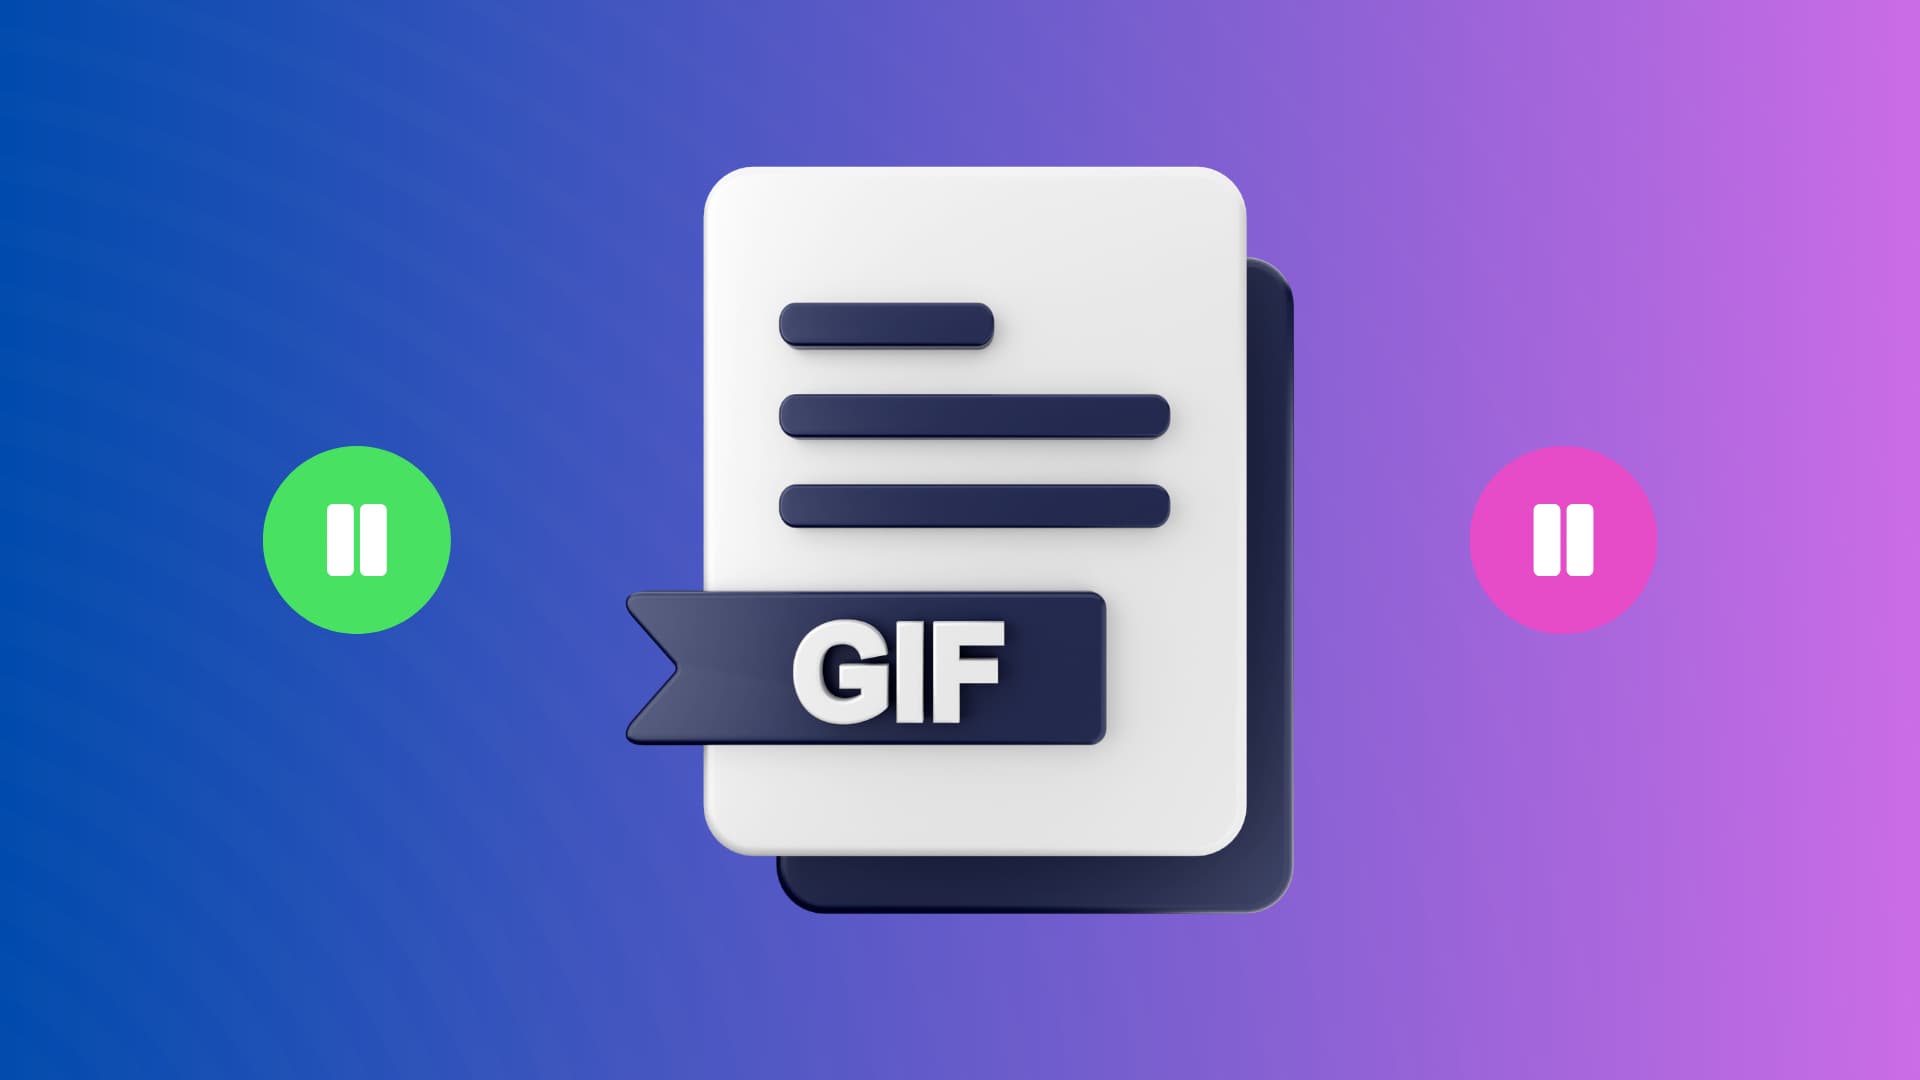 illustration showing a GIF logo with two pause icons